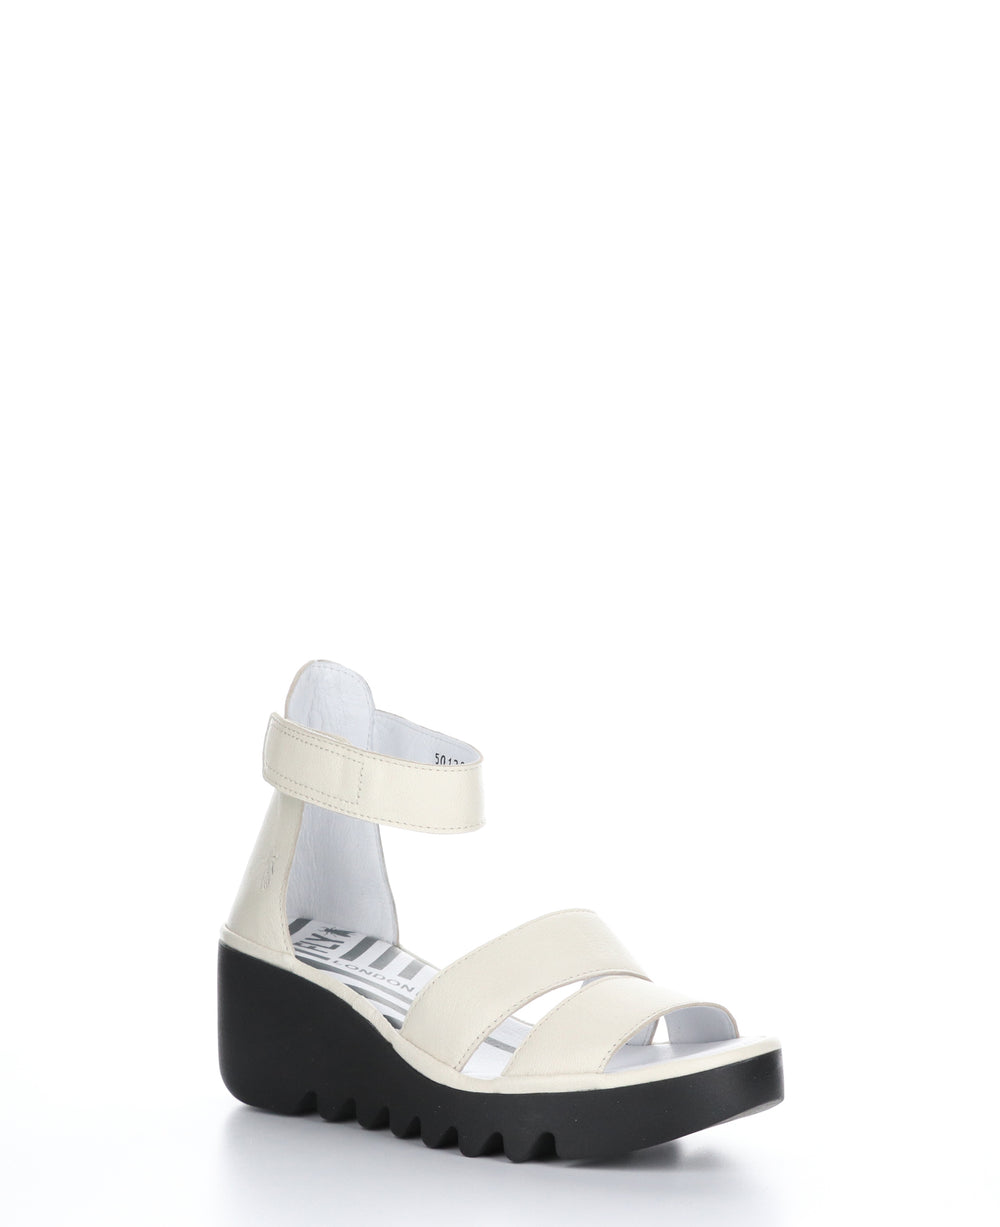 BONO290FLY Mousse Offwhite Strappy Sandals|BONO290FLY Sandales à Brides in Blanc